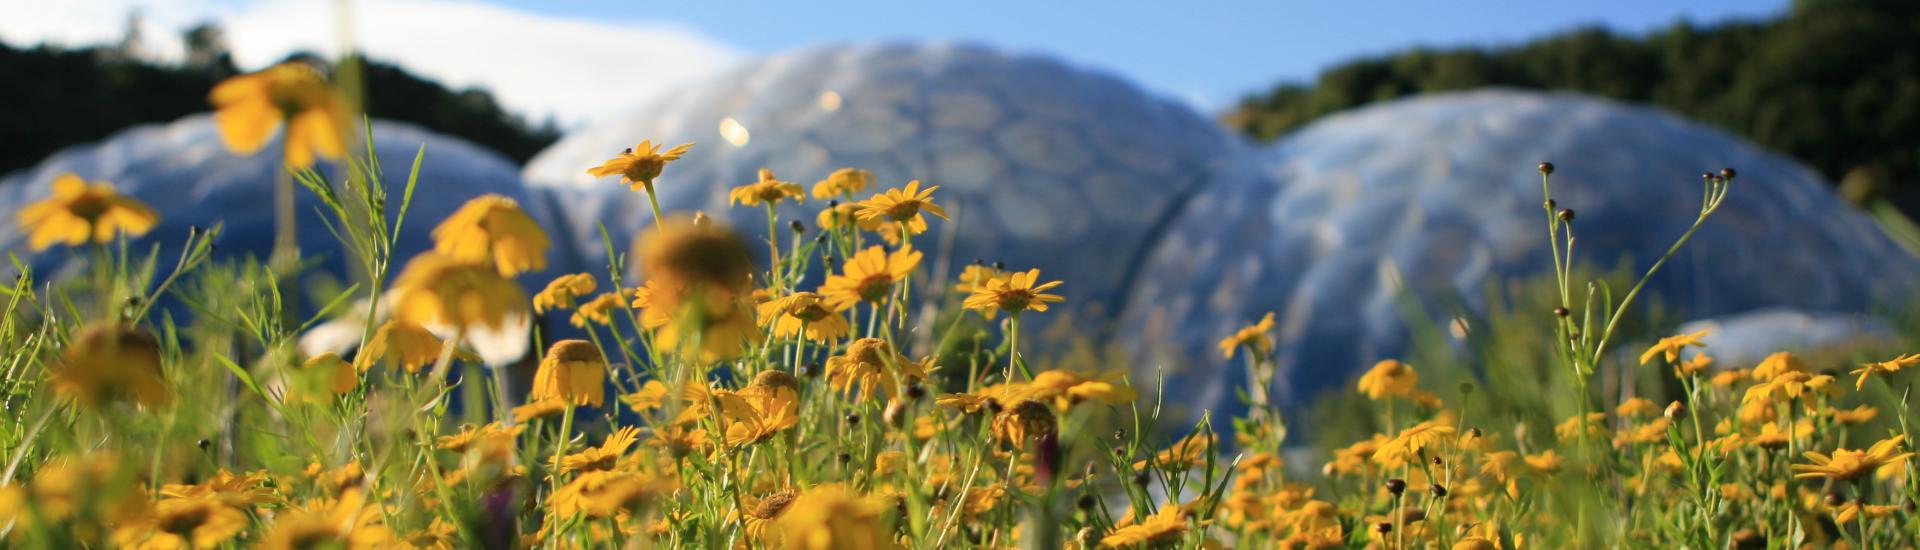 A view of the wildflowers growing in the outdoor gardens at Eden with the biomes in the far distance